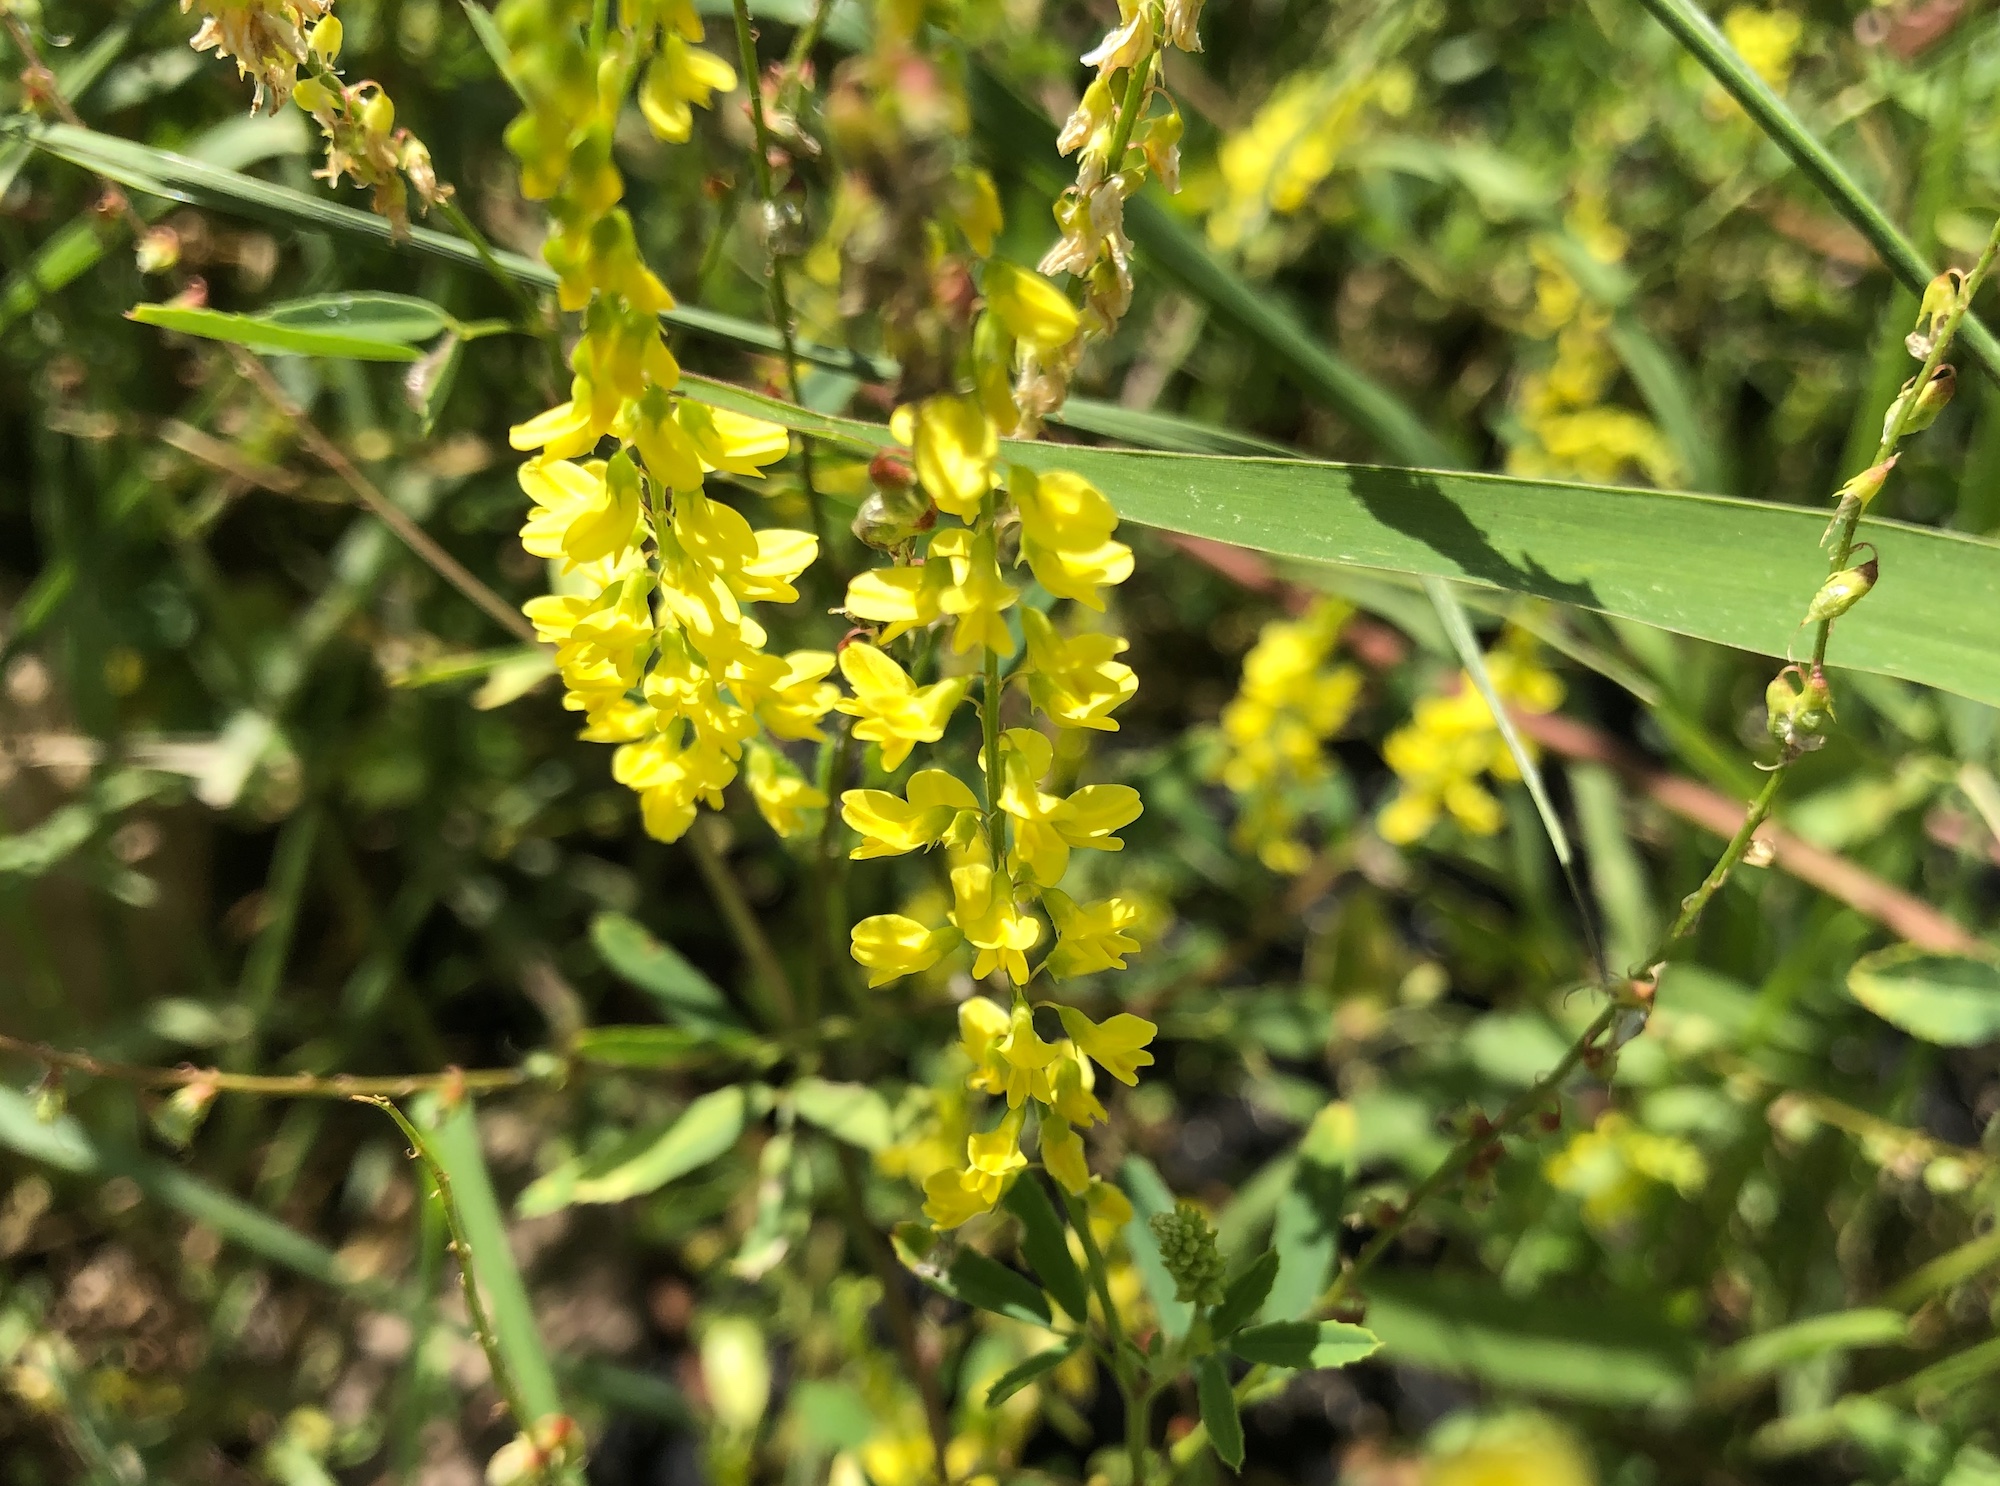 Yellow Sweet Clover by Lake Wingra at Wingra Boats in Madison, Wisconsin on July 10, 2019.